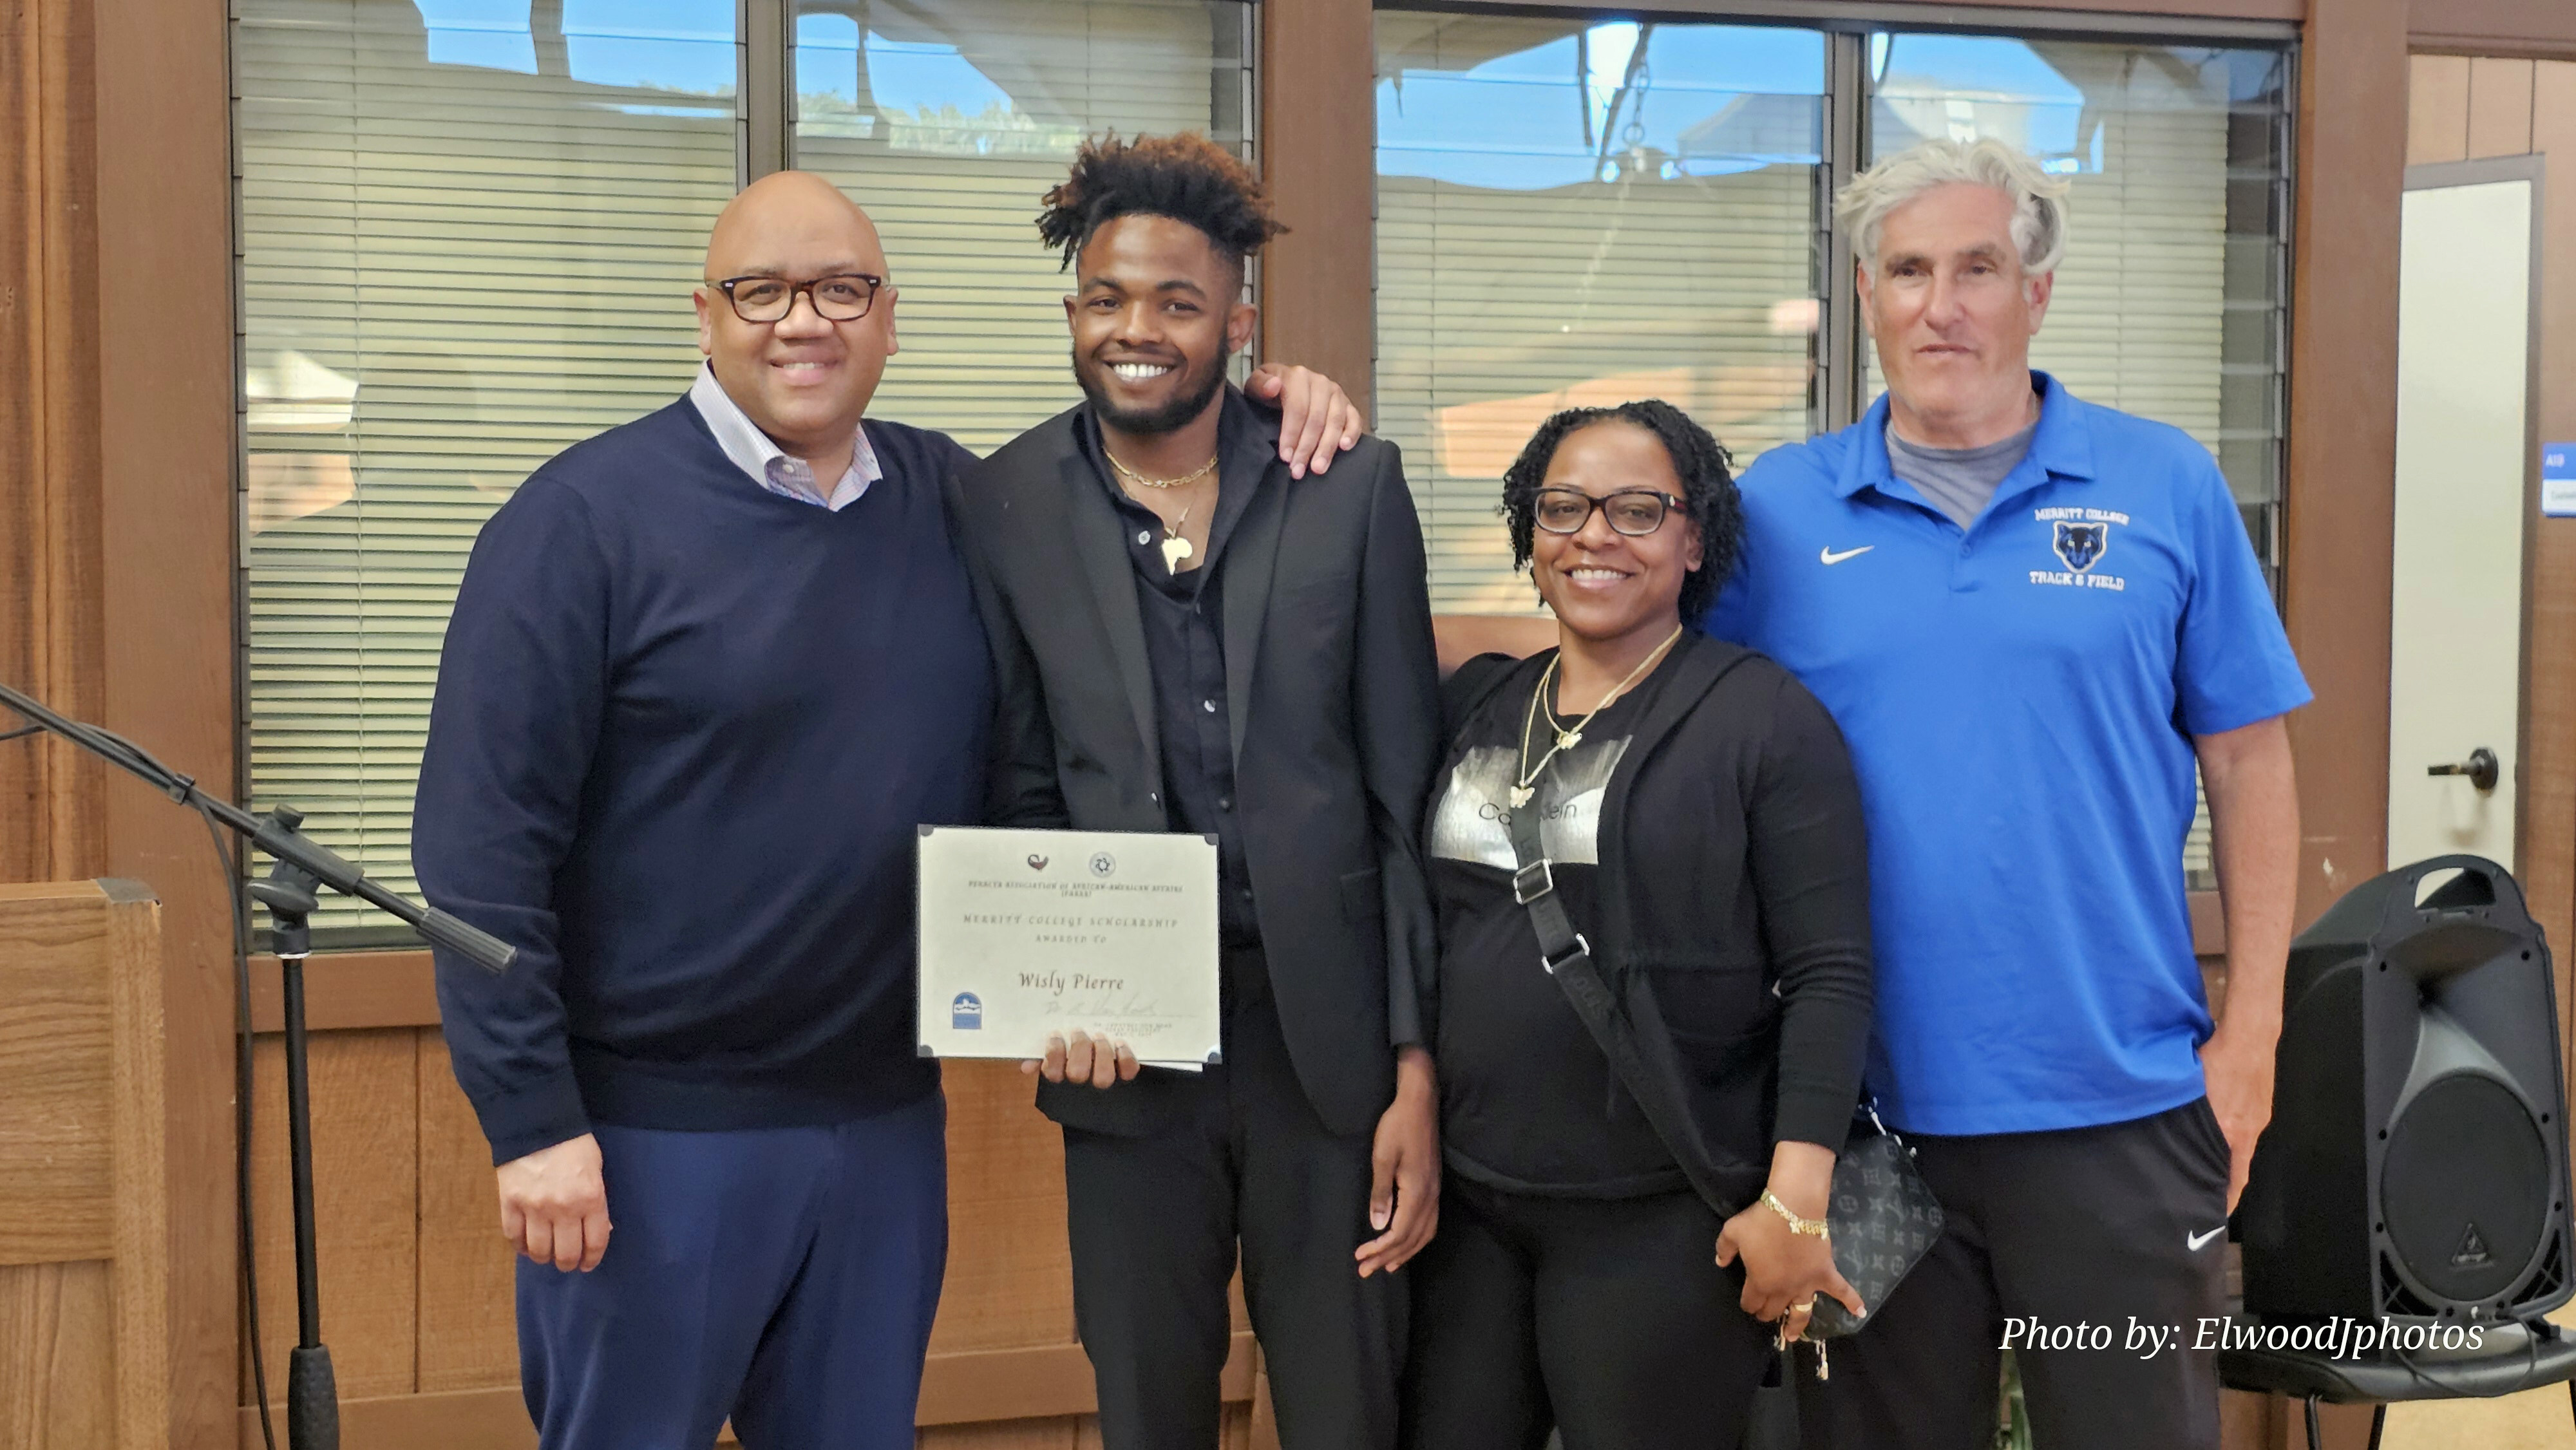 Merritt College President Dr. David Johnson presents a PAAAA Scholarship Award to student Wisly Pierre, with Tauheeda Anderson and Brock Drazen